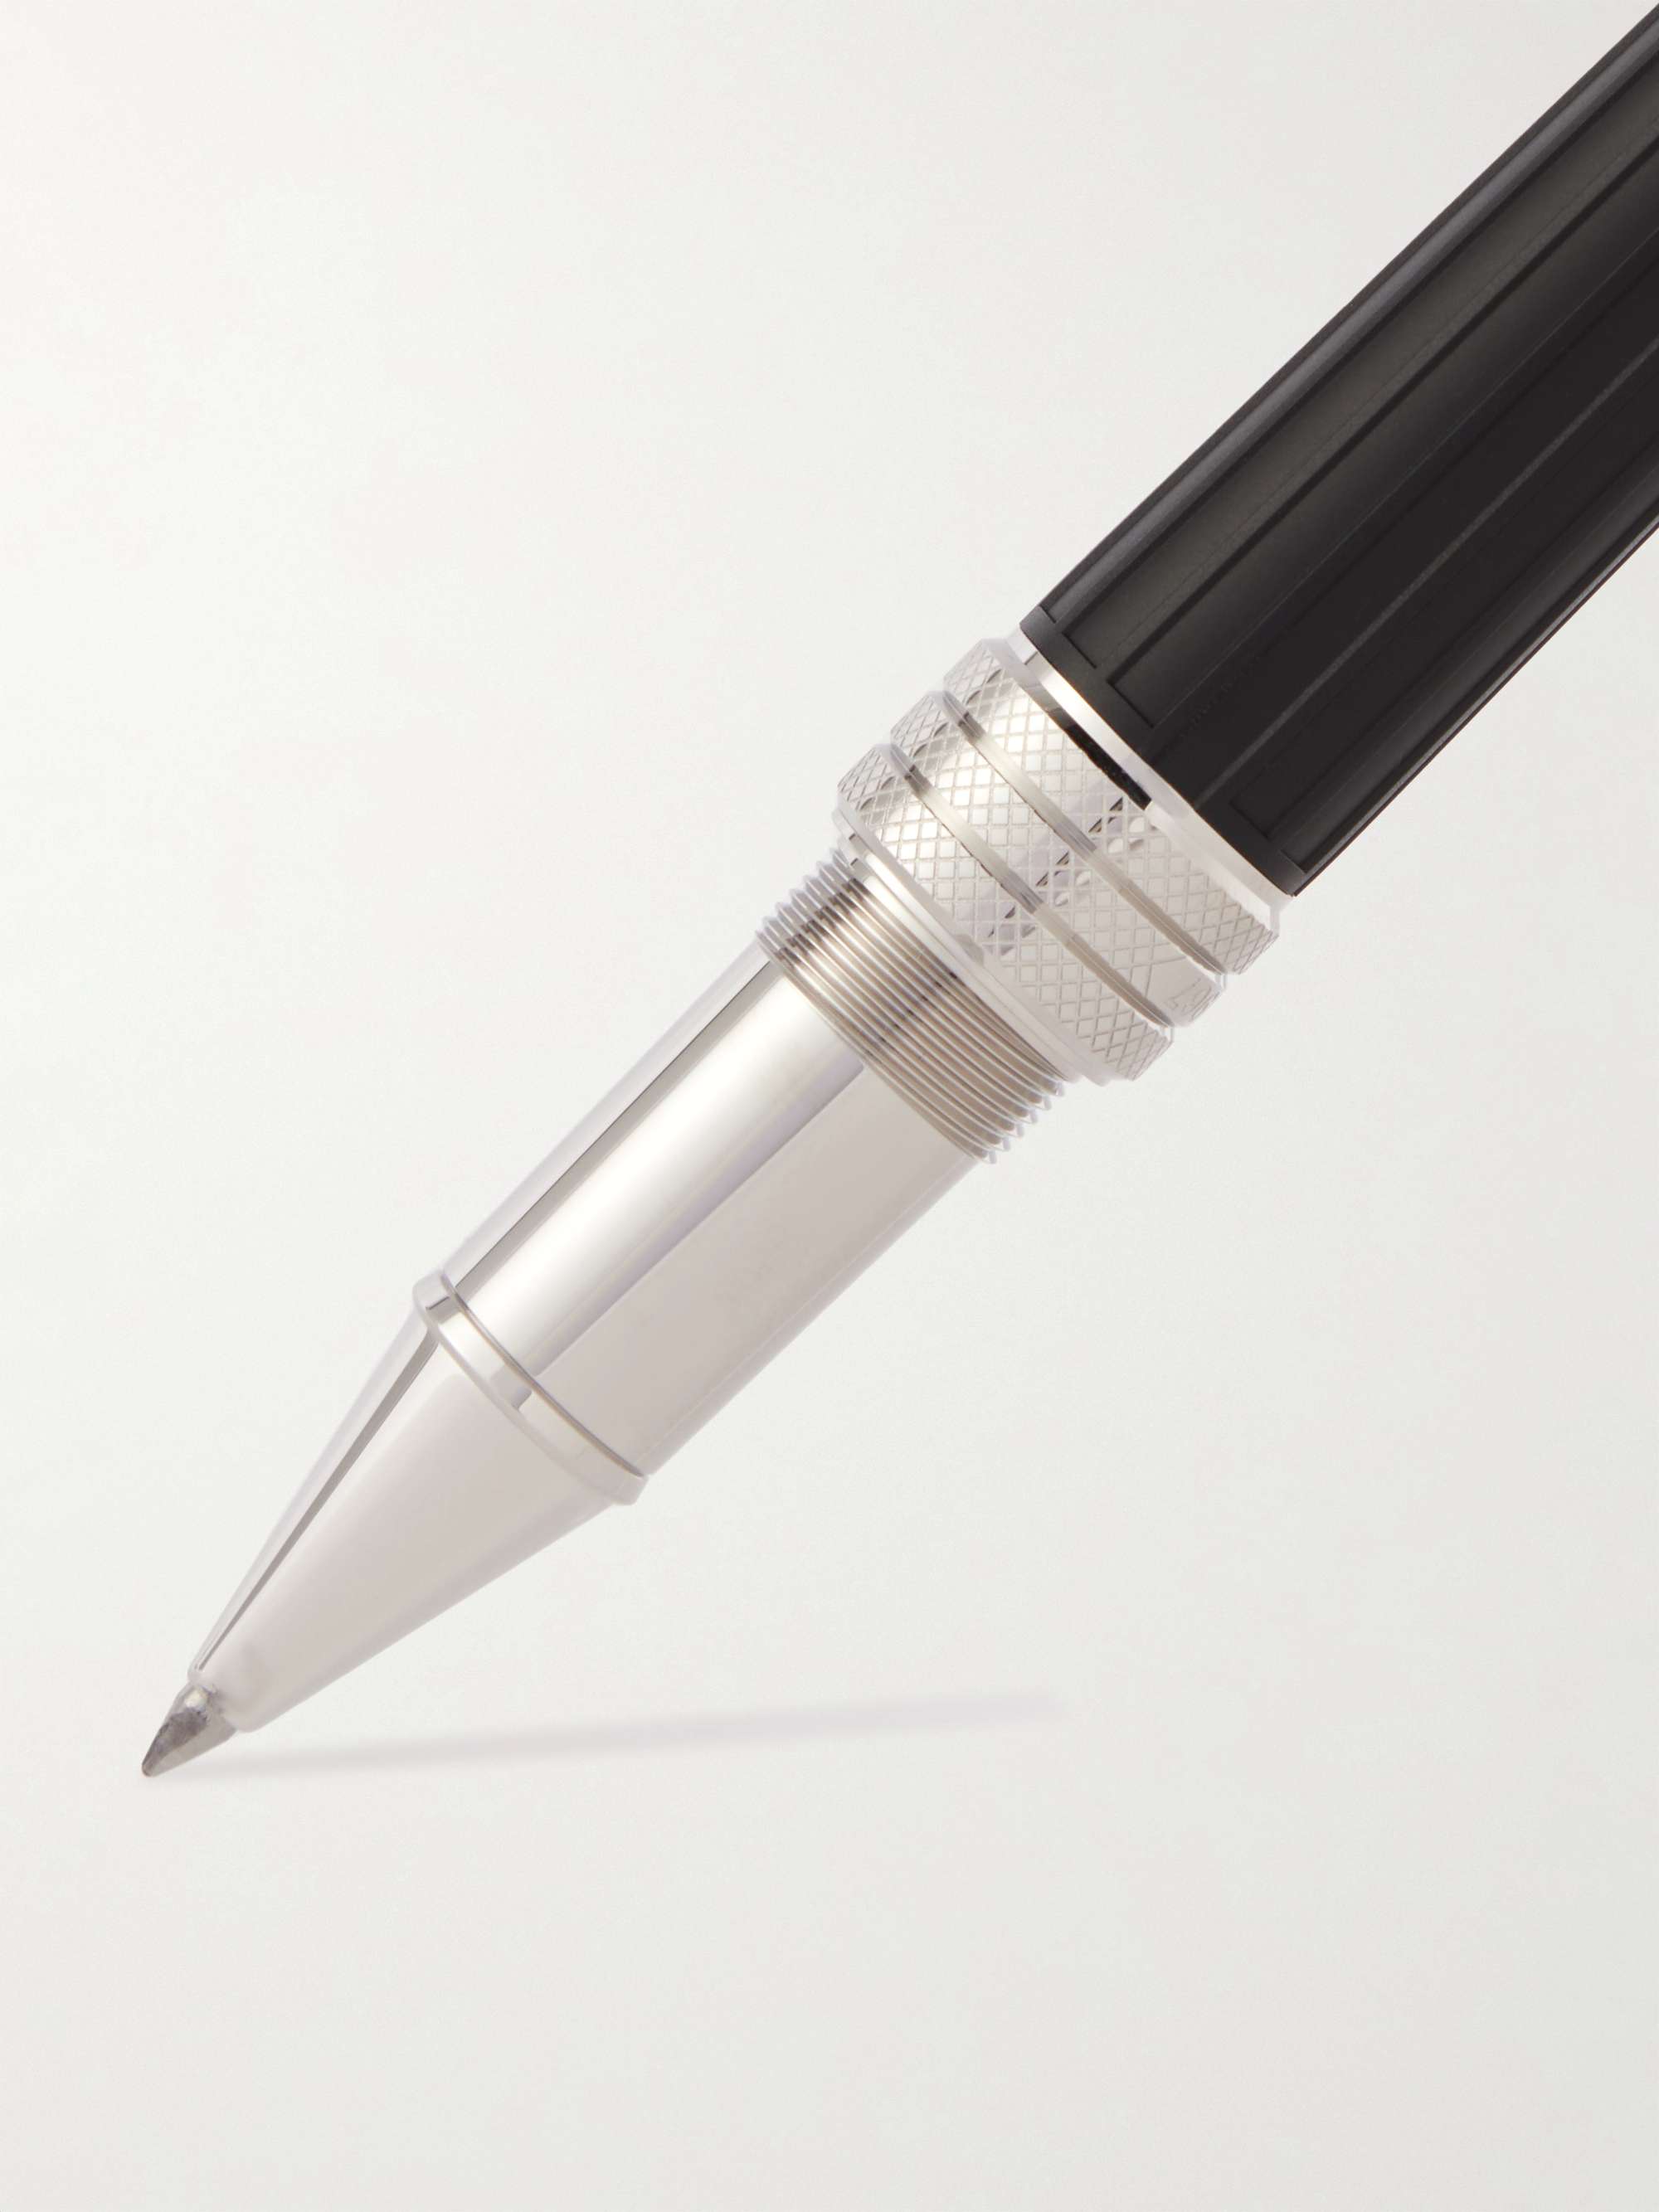 MONTBLANC Great Characters Jimi Hendrix Resin and Platinum-Plated Fountain Pen